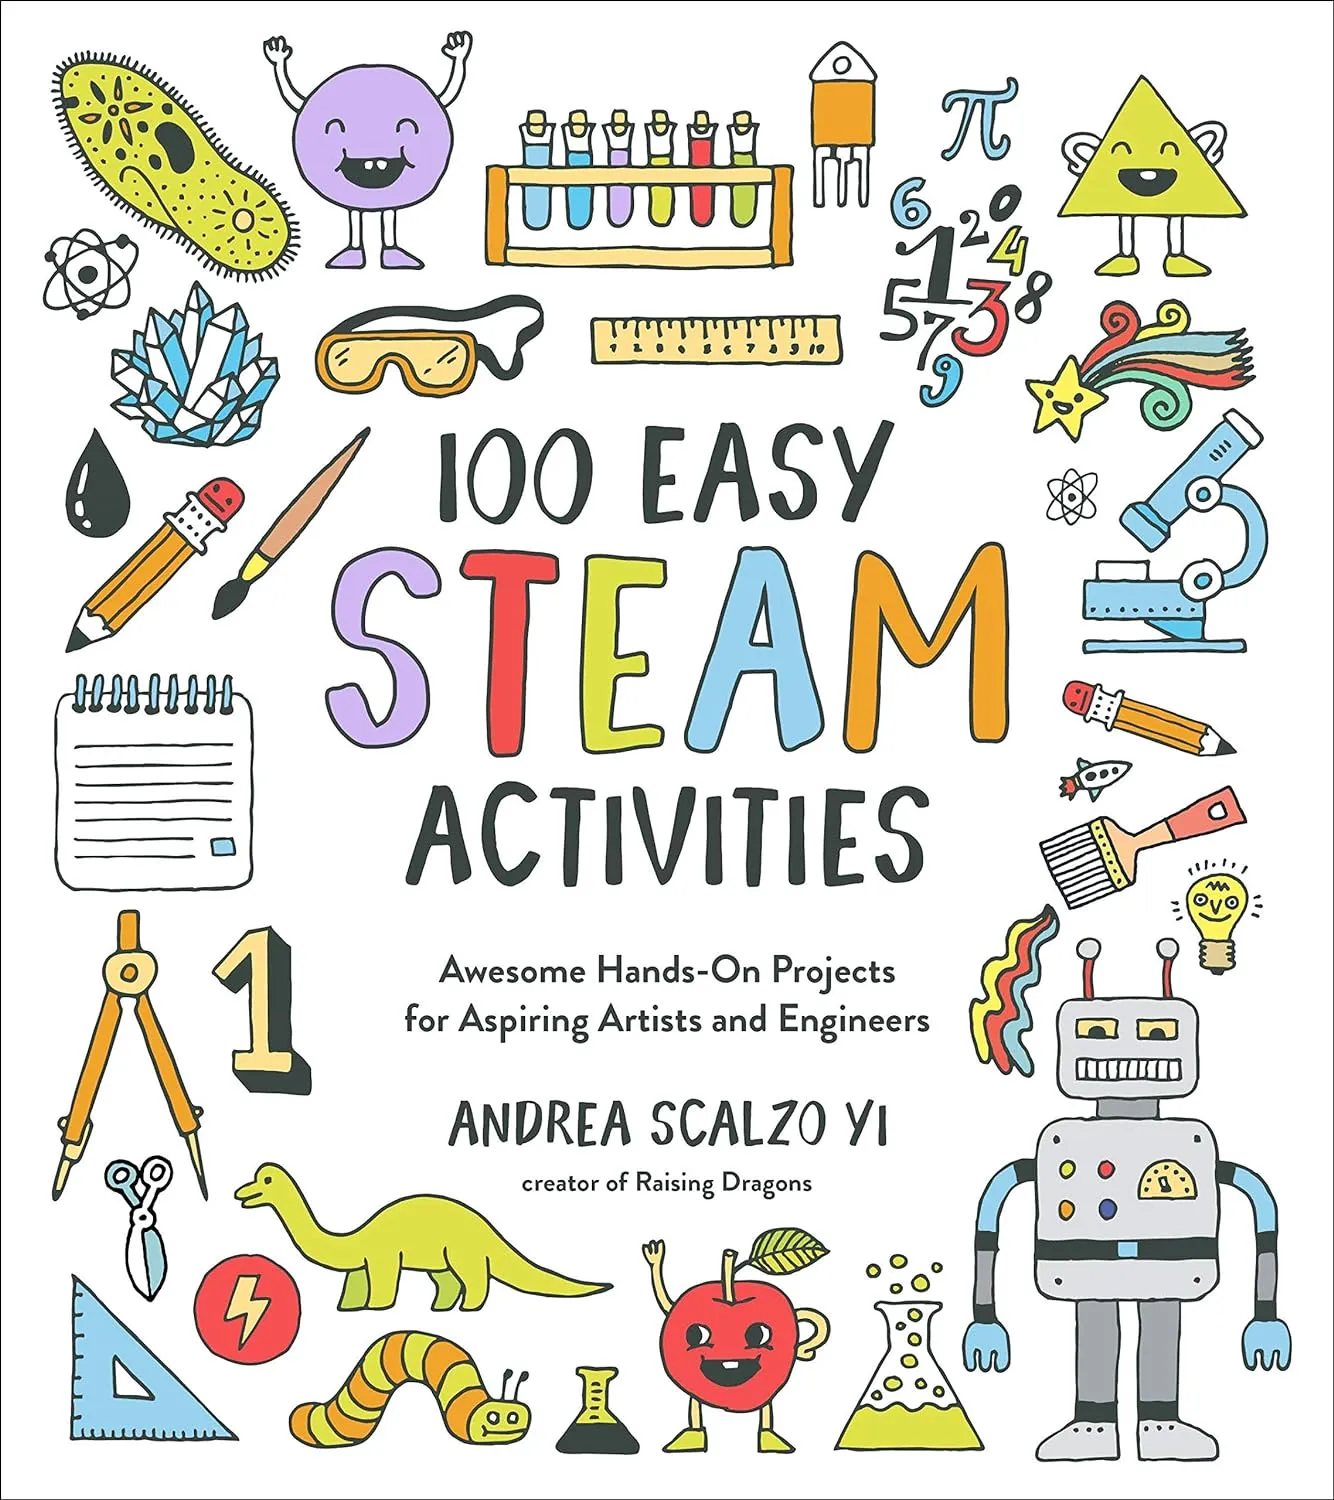 100 Easy STEAM Activities book cover